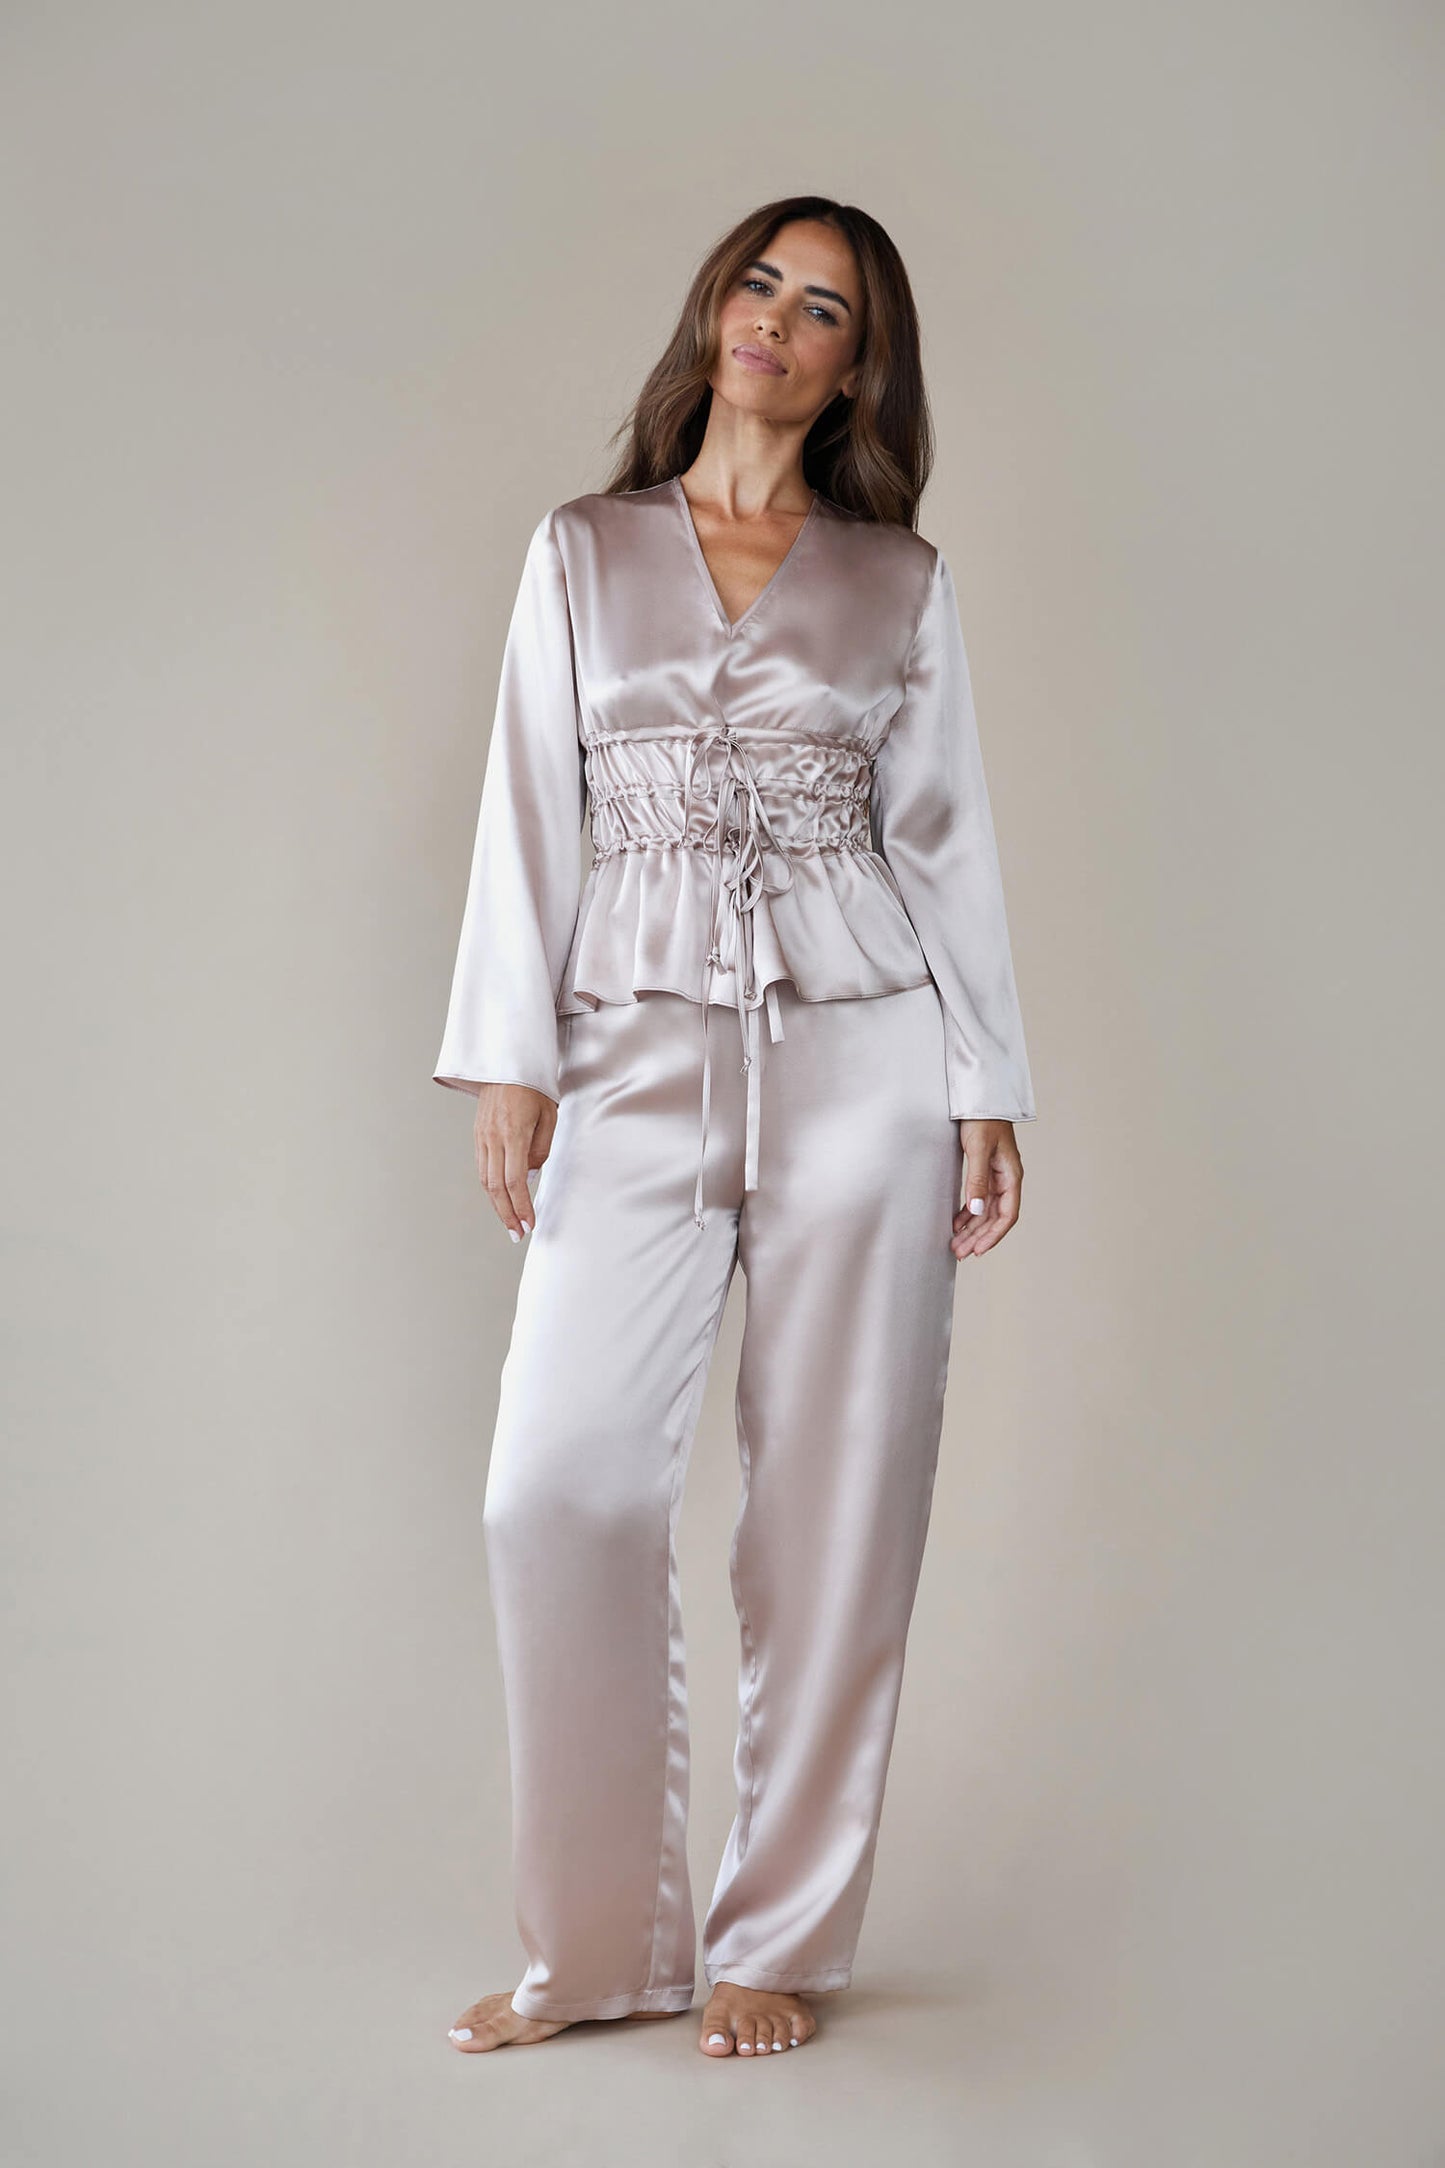 Model wears silk satin loungewear set in colour rose fawn. Her top is a long sleeved, V neck top with a corset style waist and she wears straight legged pyjama style silk trousers with a drawstring, elasticated waist. She looks towards the camera